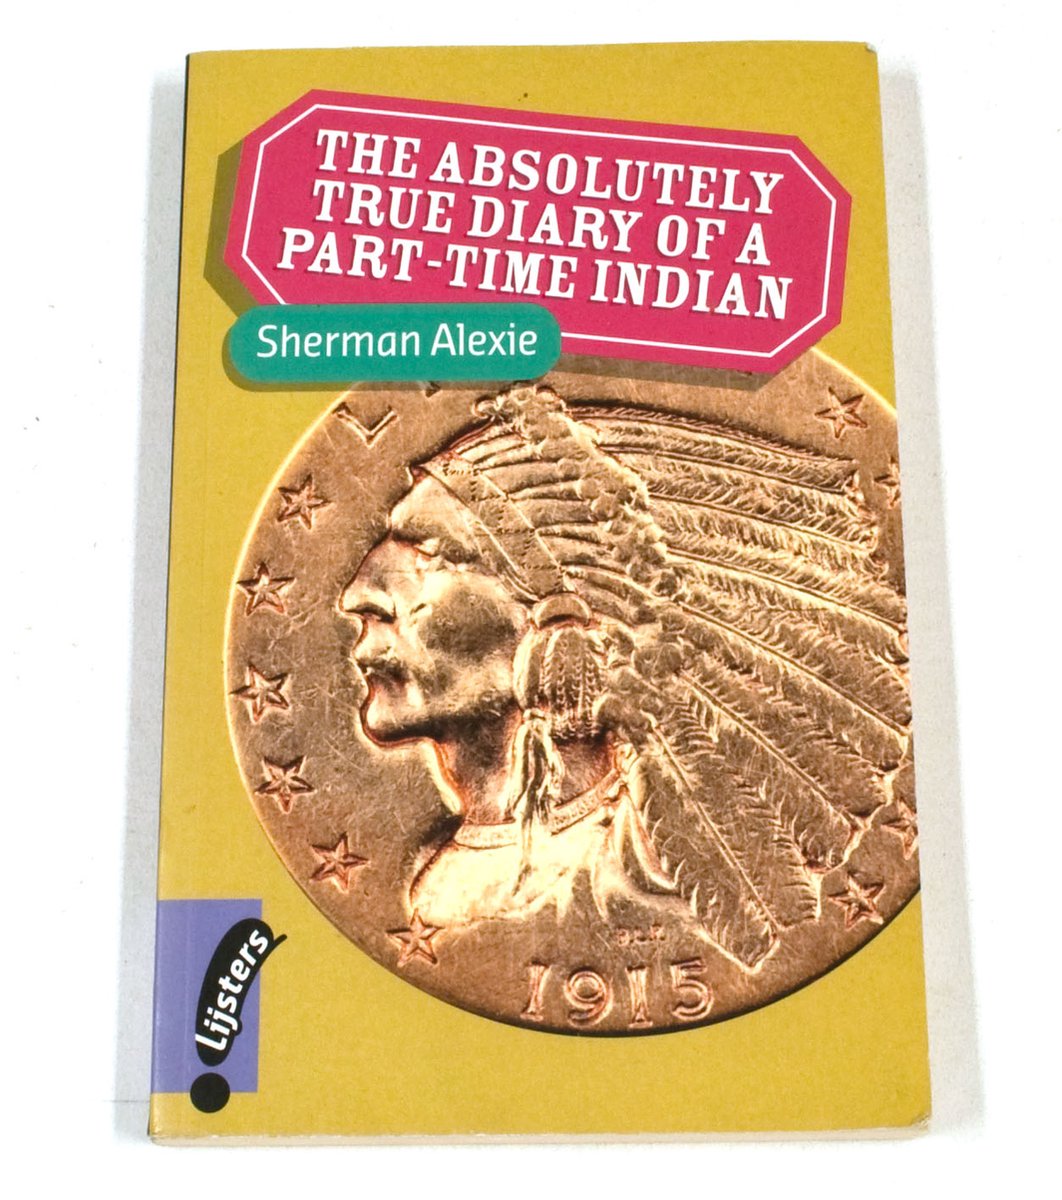 The Absolutely True Diary Of A Part-Time Indian